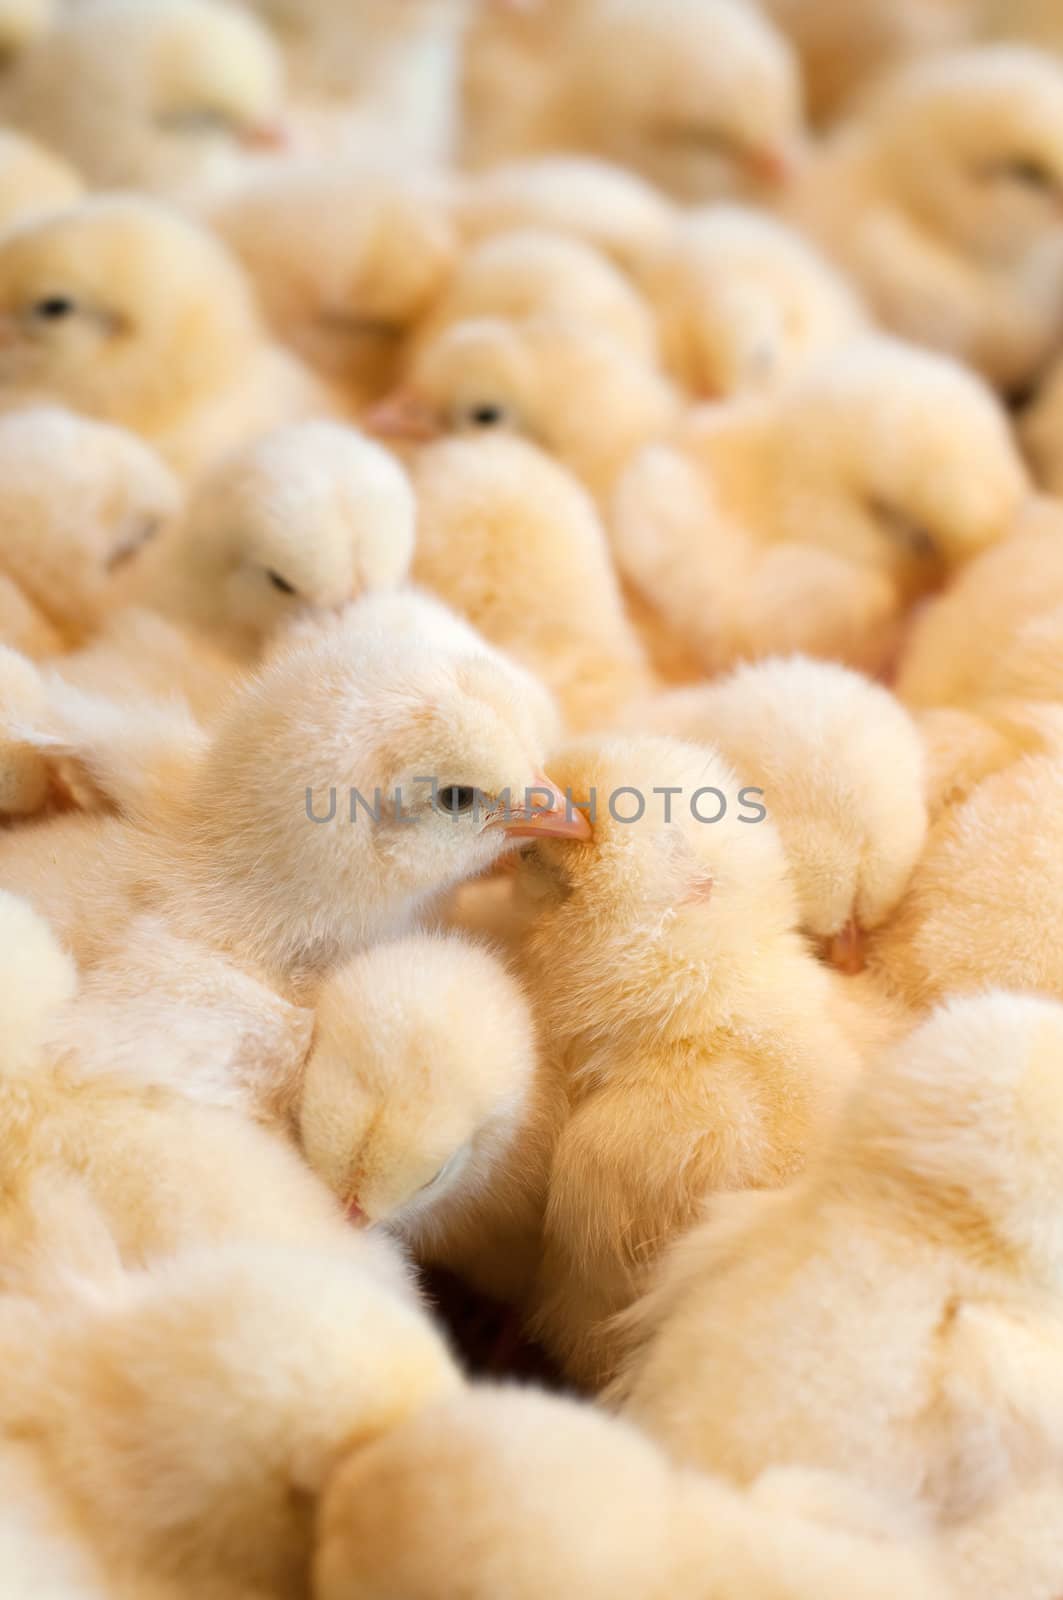 Group of chicks crowded in farm